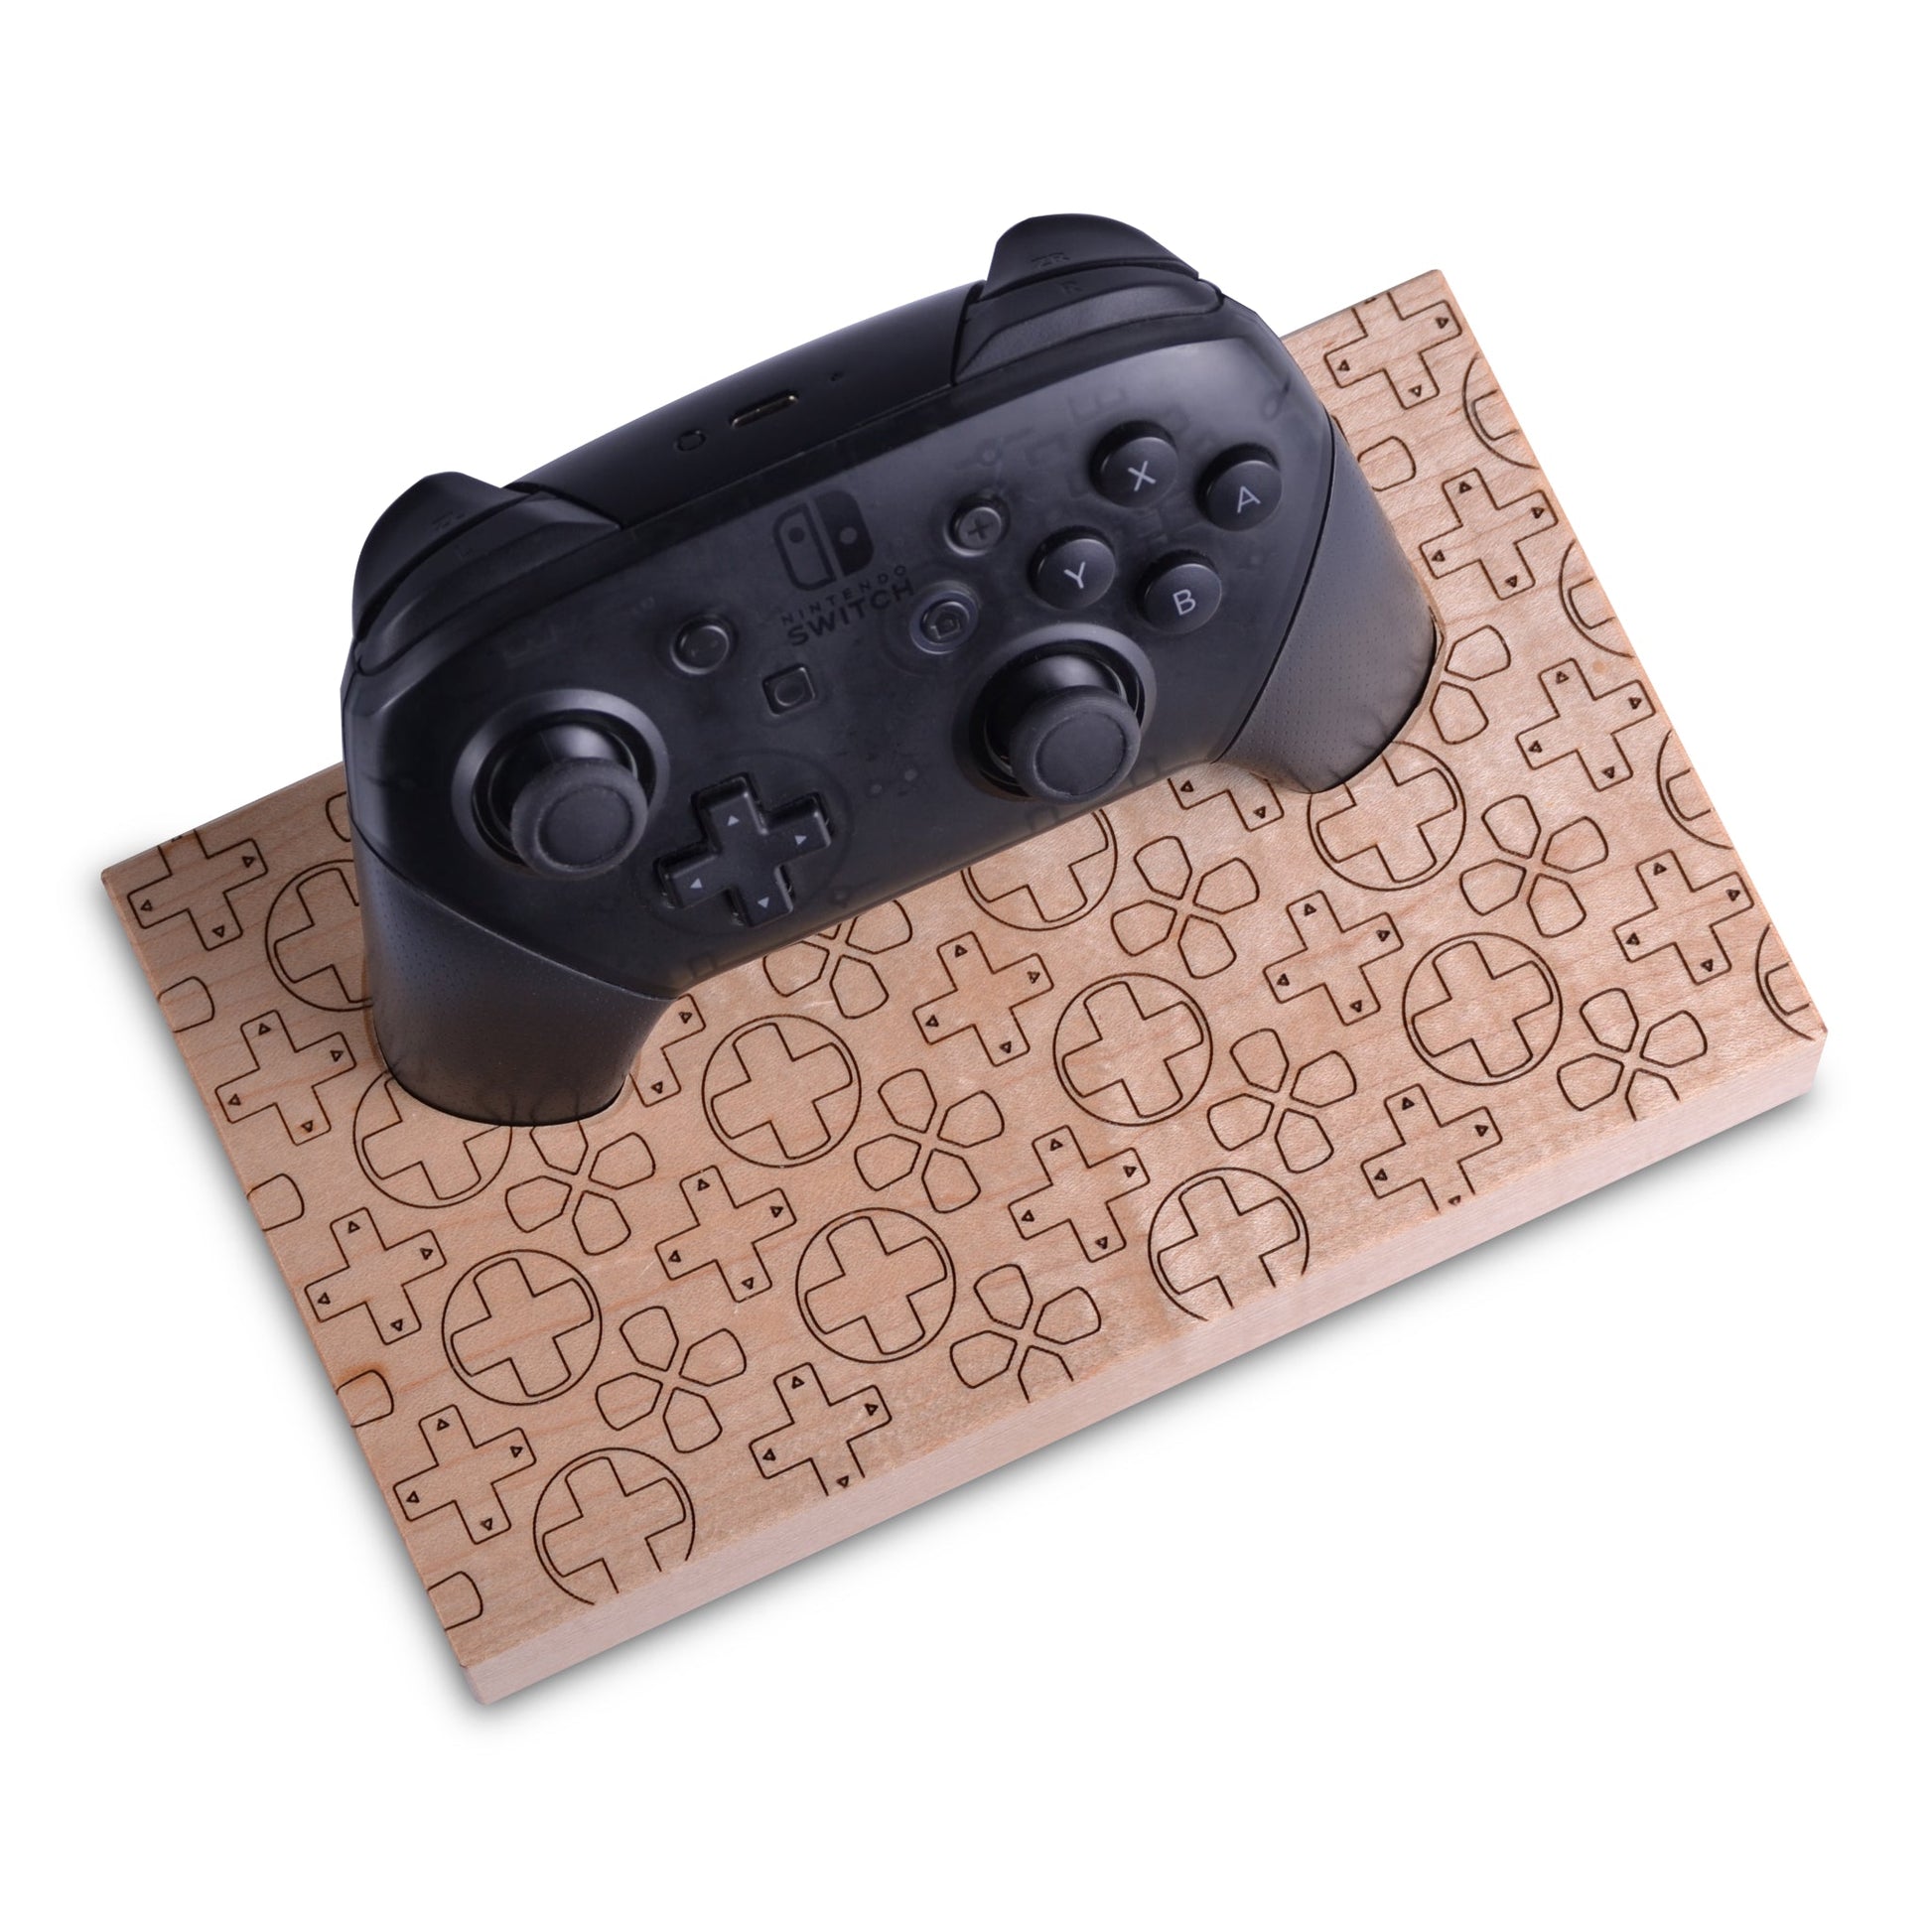 Wooden stand with d-pad design for Nintendo switch pro controller